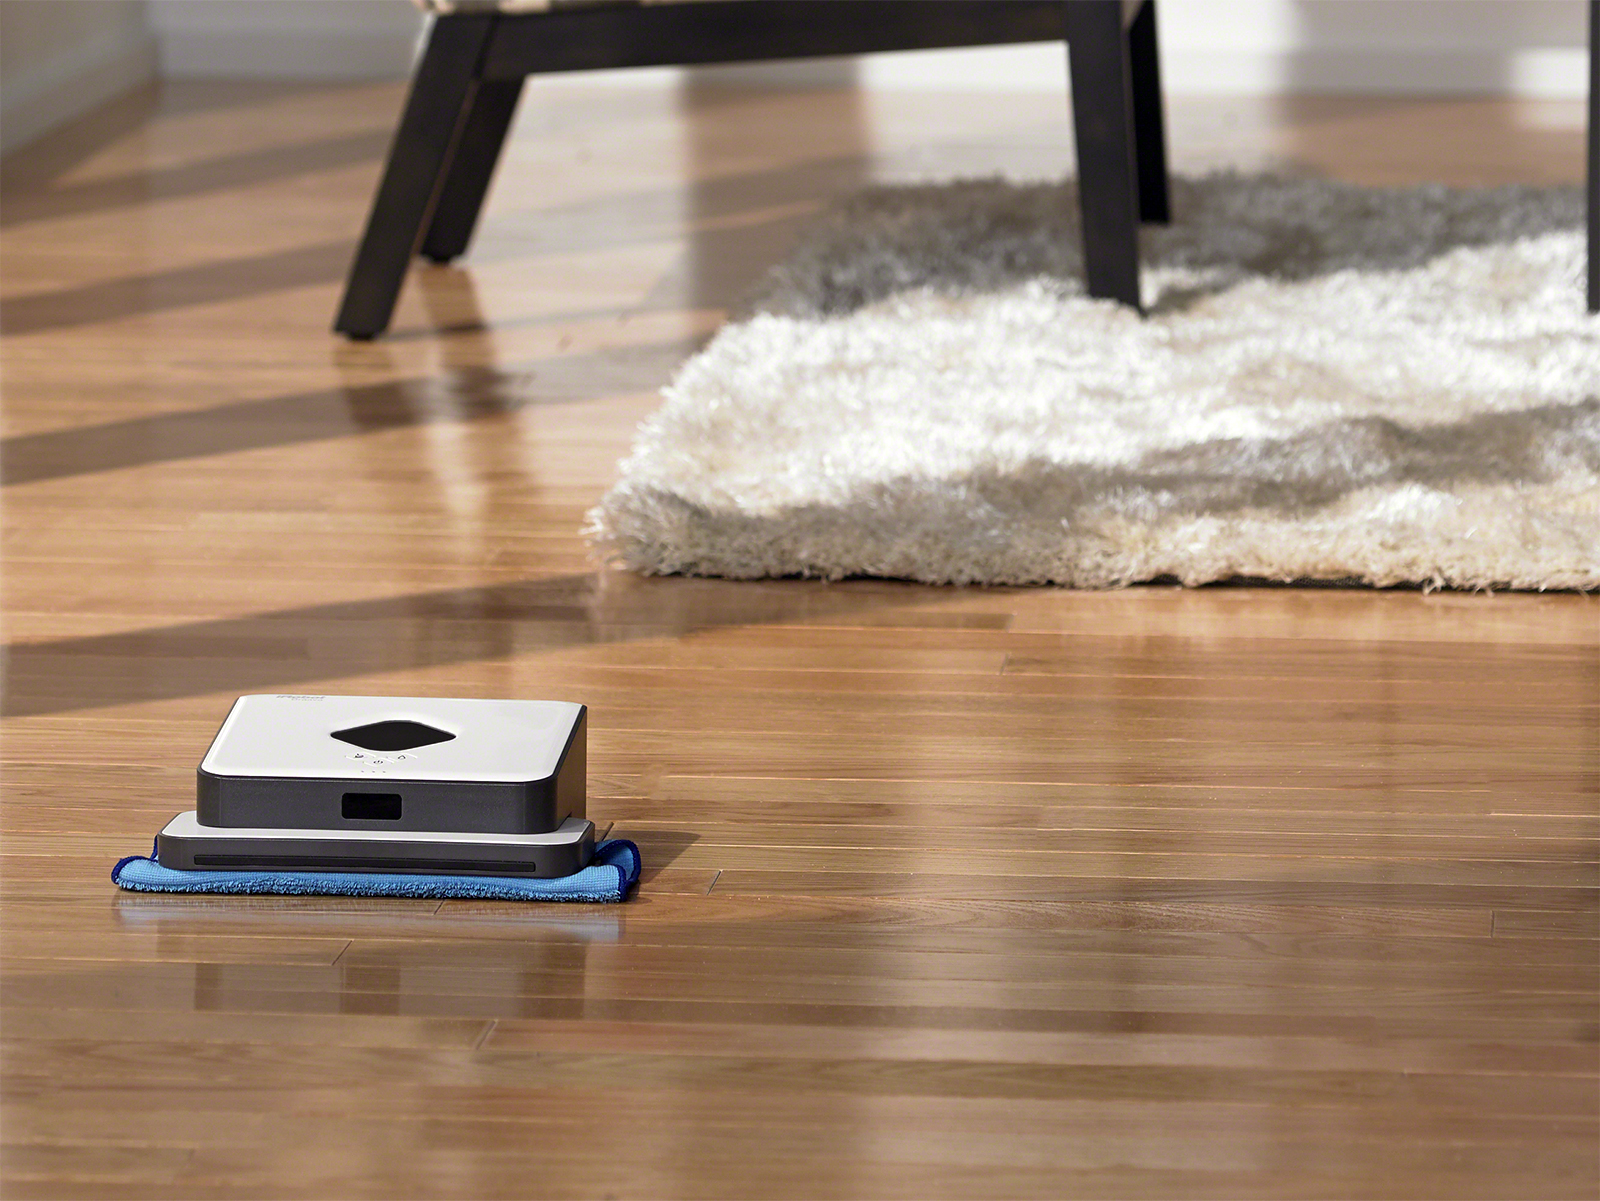 Braava 390T by Irobot : the cleaning robot!